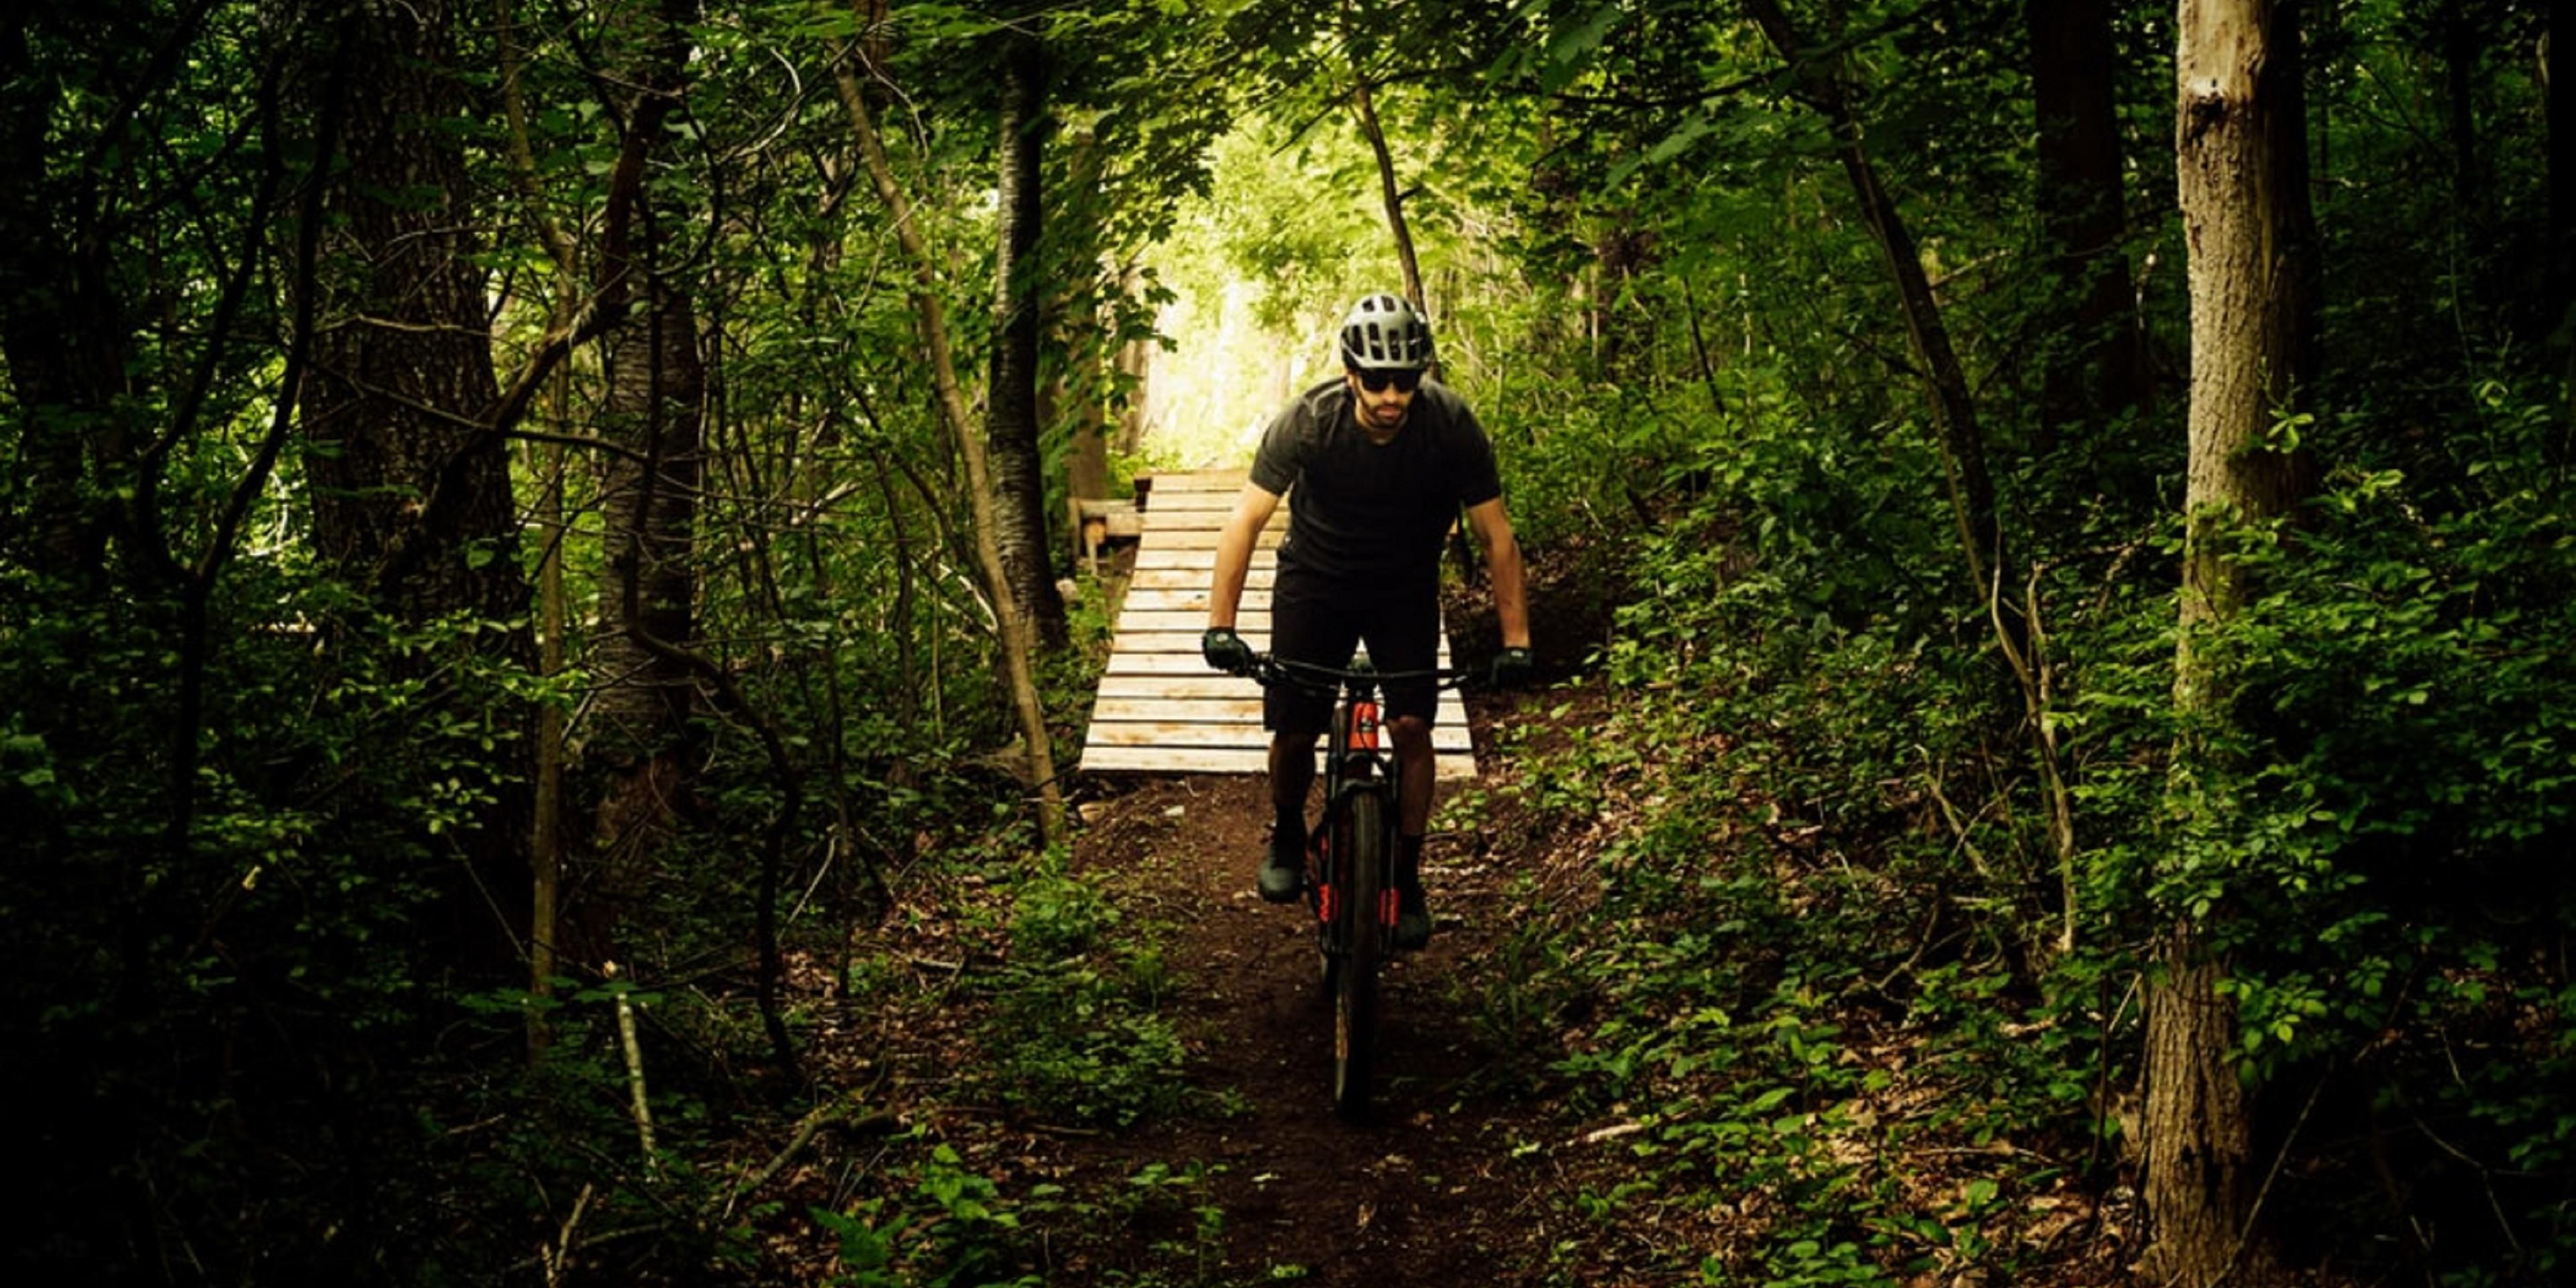 If you're visiting Tallahassee and enjoy the outdoors, try hiking or biking on one of our many amazing trails. You can also check out the historic landmarks around town. We are a family-friendly area with plenty of activities to keep you busy along with some amazing restaurants we know you'll enjoy. 